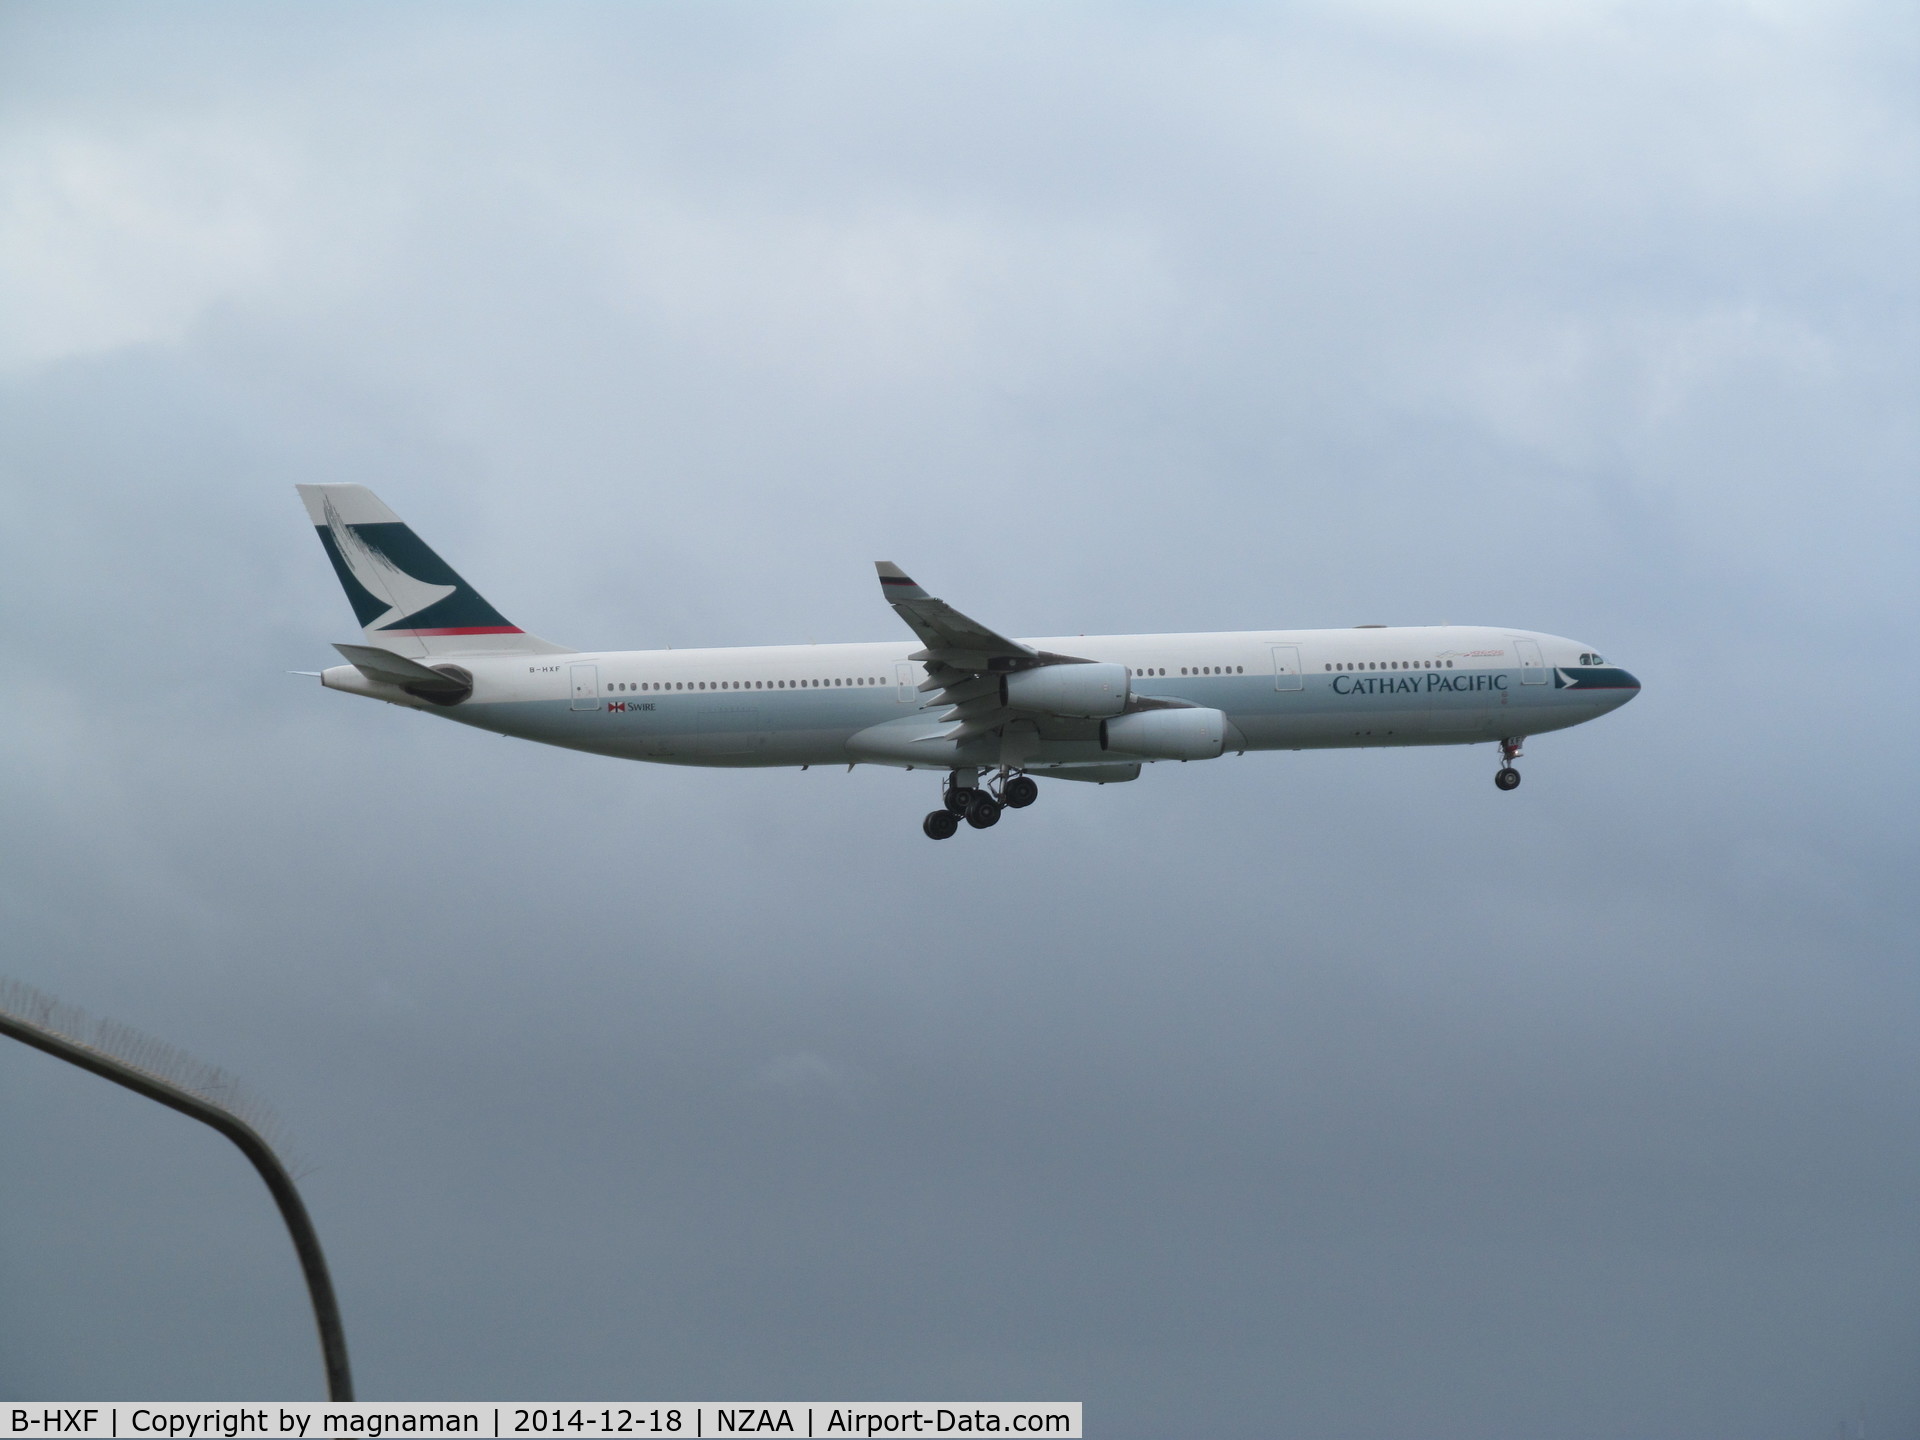 B-HXF, Airbus A340-313 C/N 160, landing at AKL - lots of street lamps to try and avoid!!